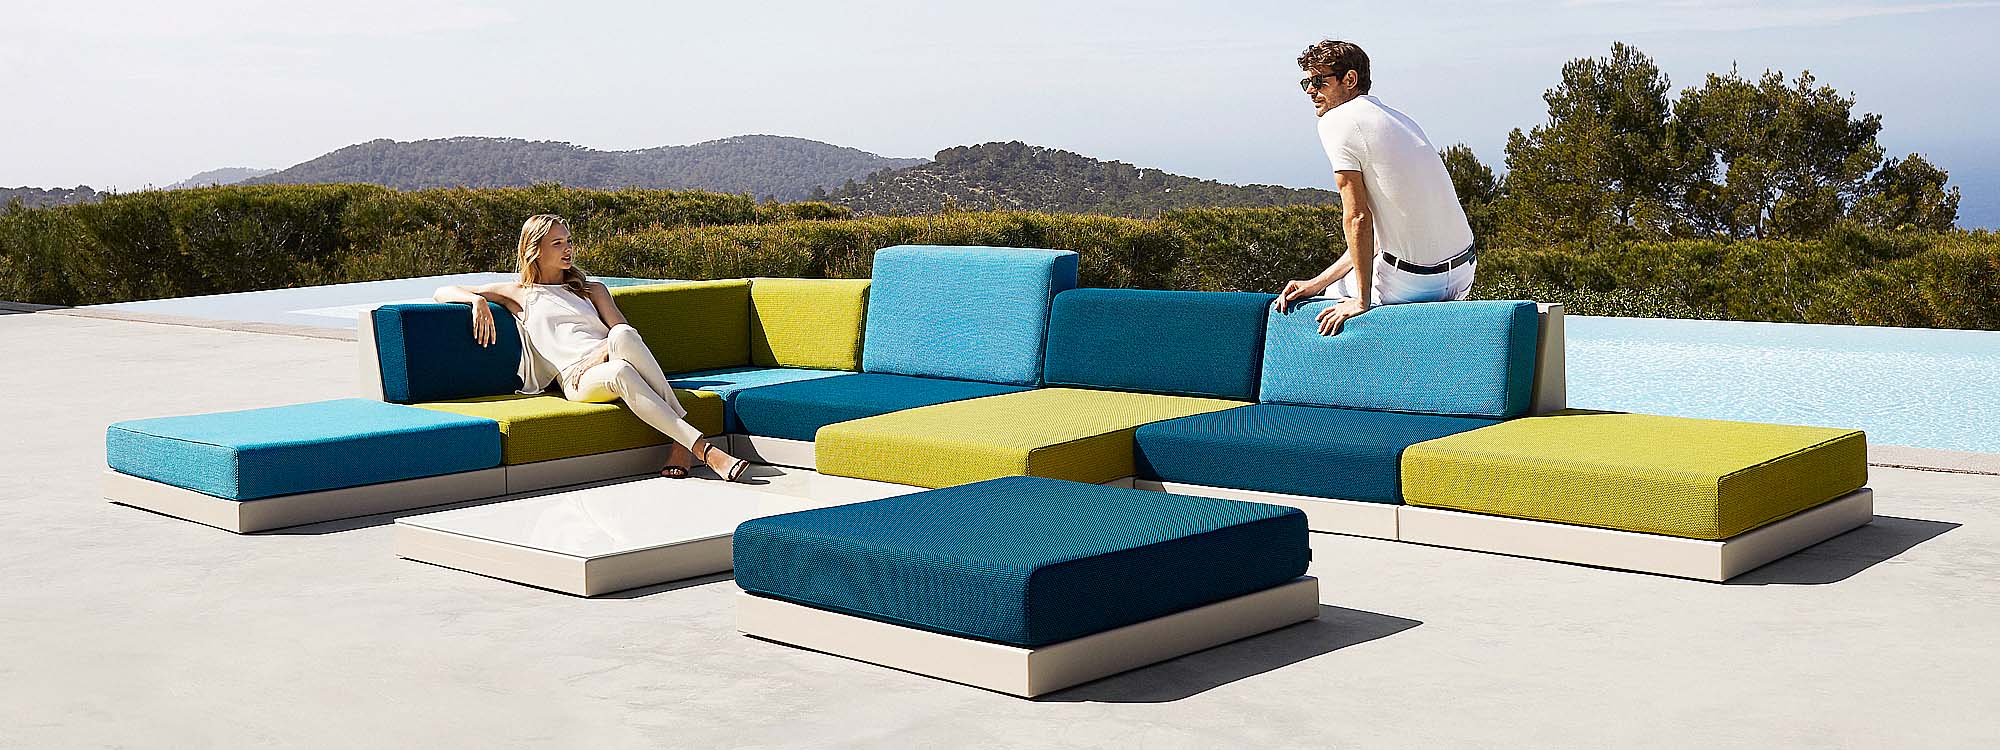 Image of man and woman relaxing on Vondom Pixel modern garden sofa with cushions in range of colours